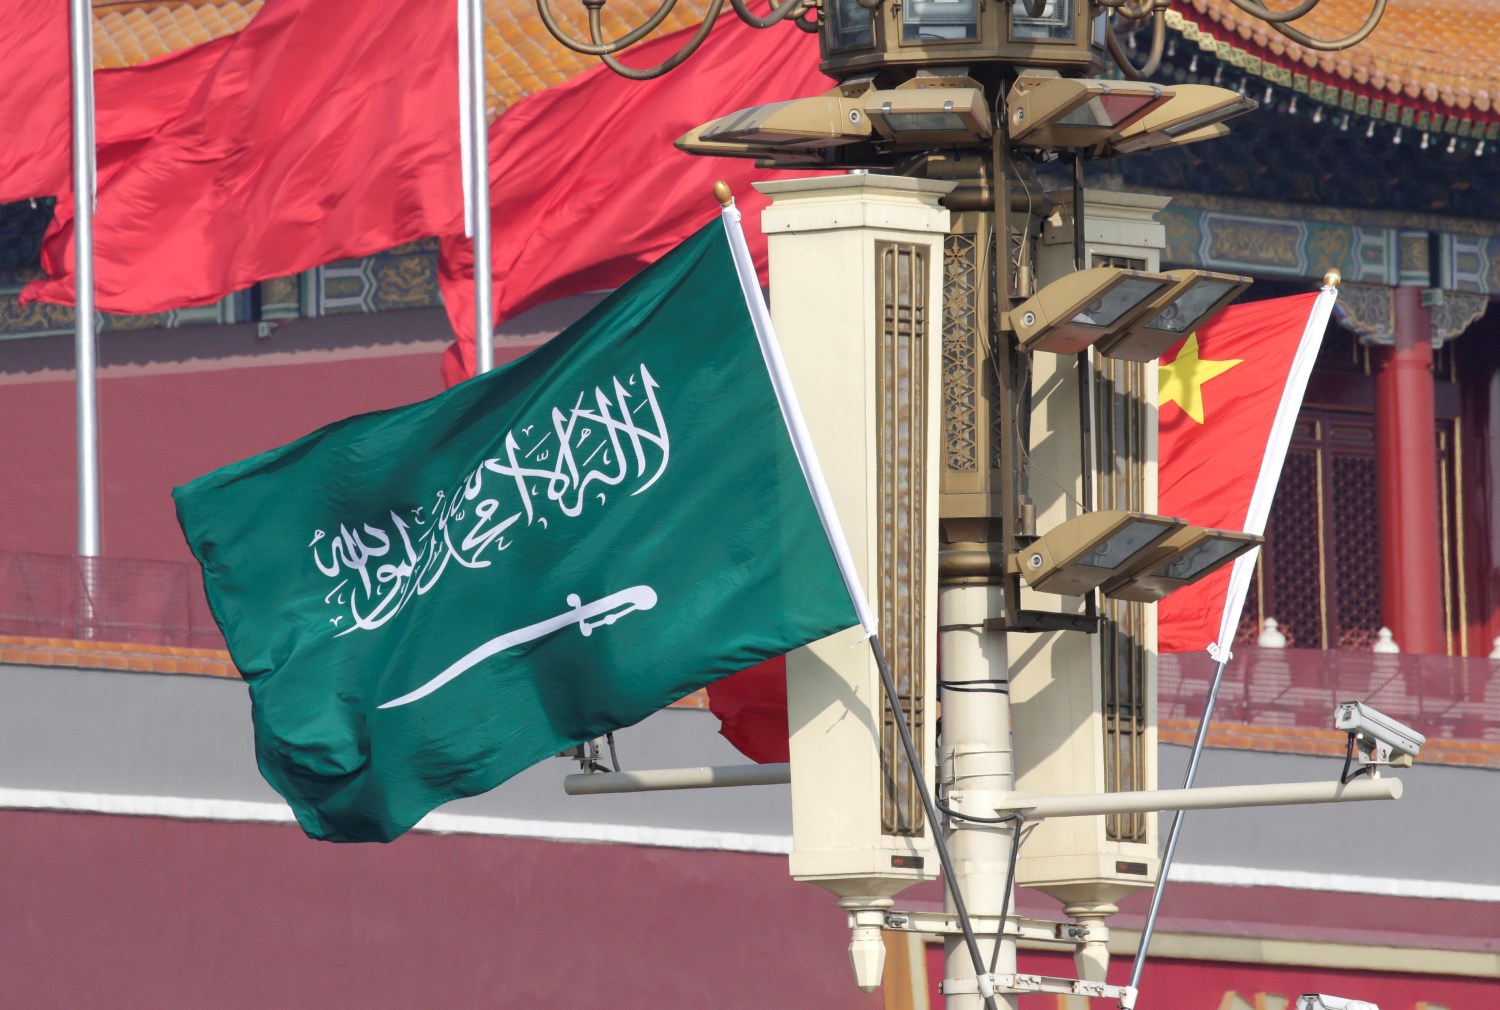 Flags of Saudi Arabia and China are hung in front of Tiananmen Gate before Saudi Crown Prince Mohammed bin Salman's visit to Beijing, China February 21, 2019. REUTERS/Jason Lee